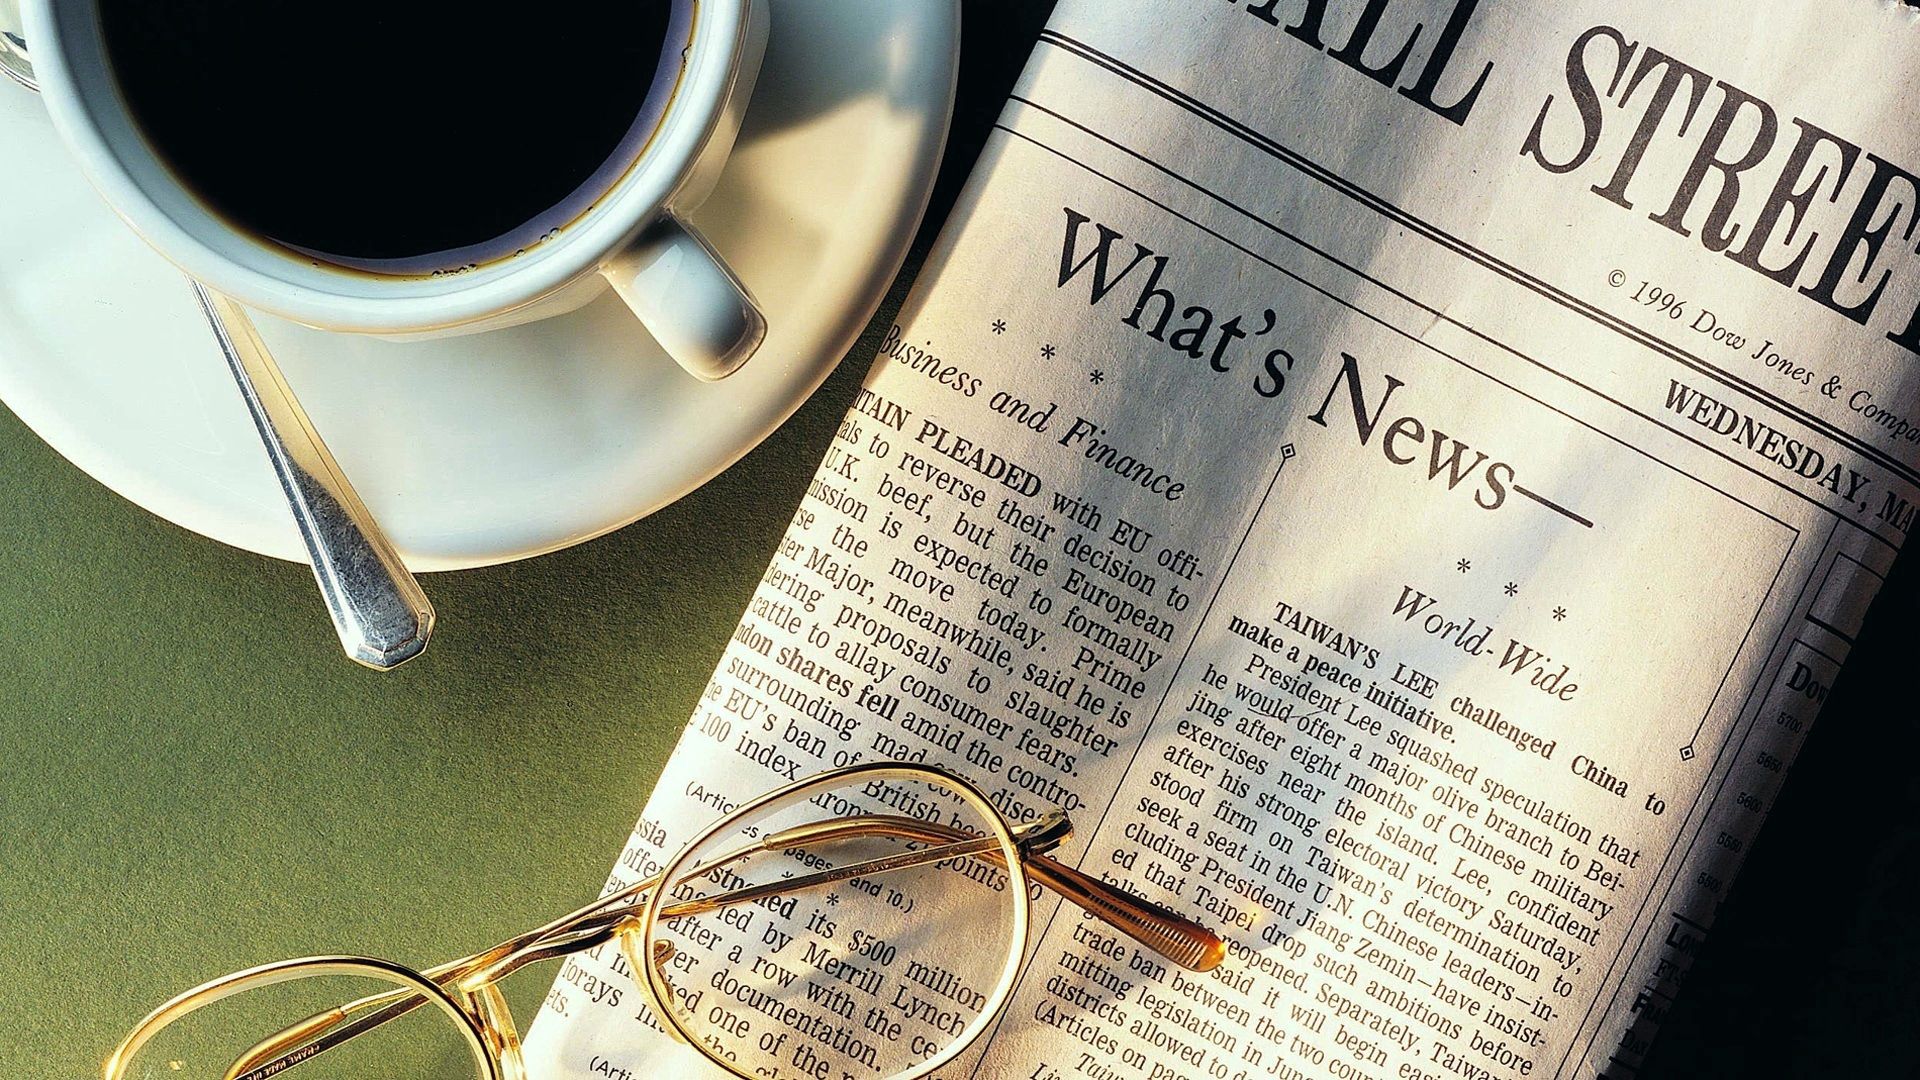 news, newspaper, food, coffee, cup, glasses, spectacles, spoon, cup holder